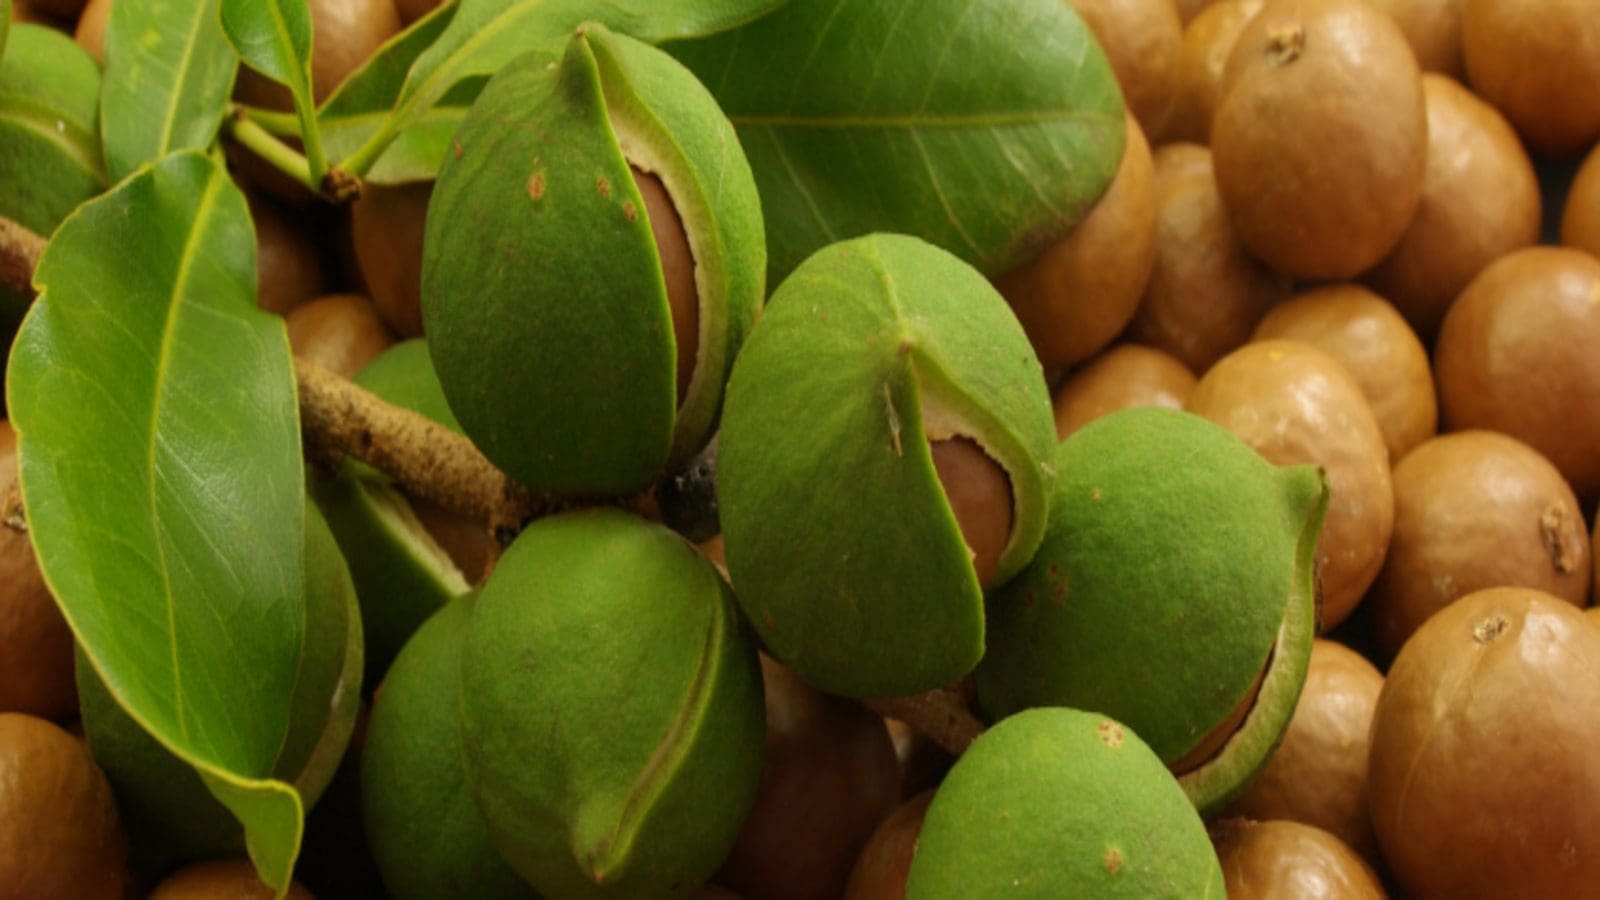 Government seeks unconventional macadamia uses to boost farmers ...